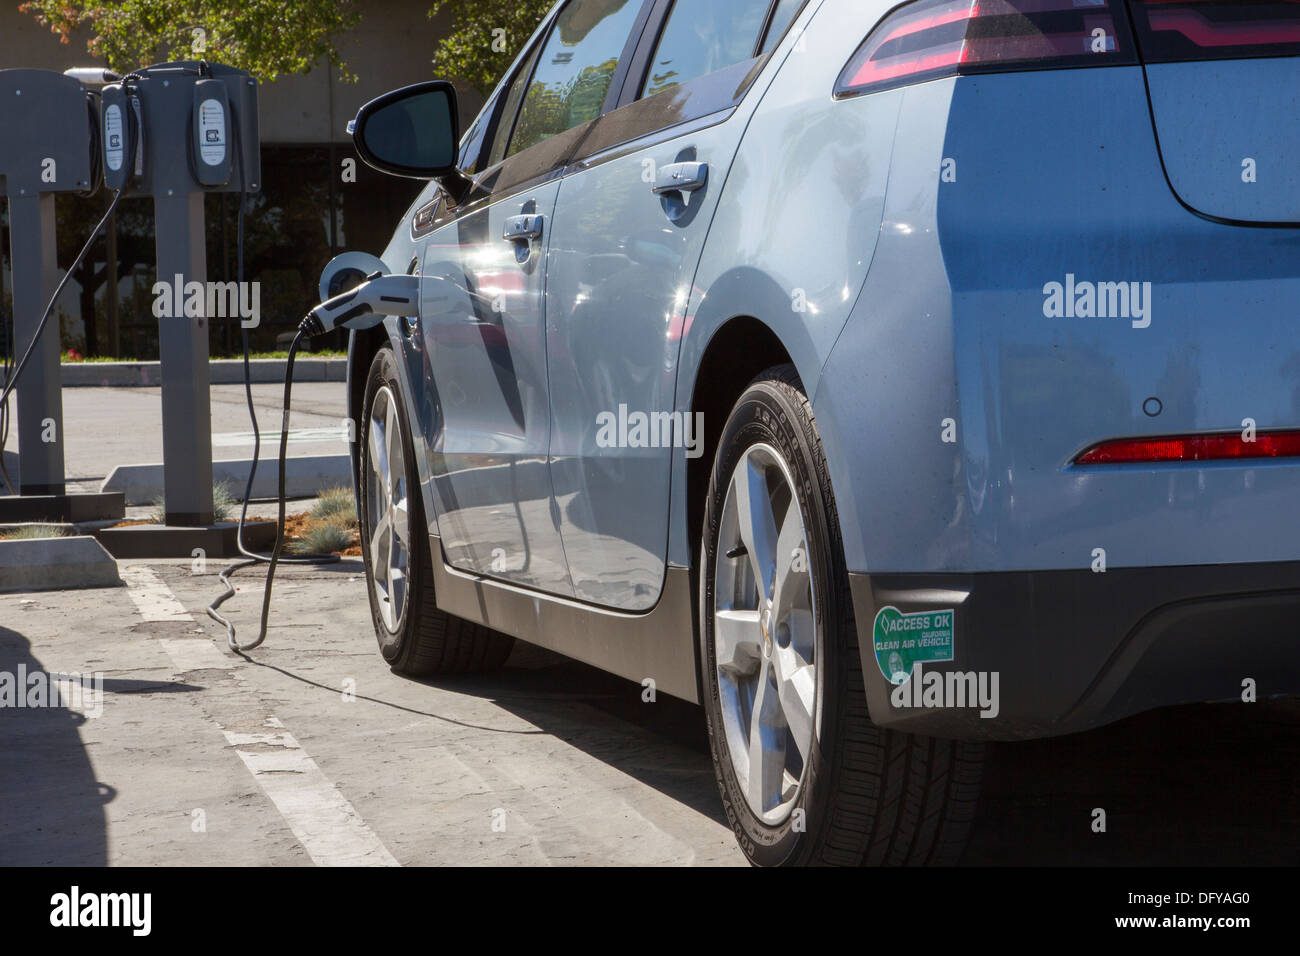 Plug-in electric car with carpool sticker plugged into an EV charging station to charge its batteries in a workplace parking lot Stock Photo